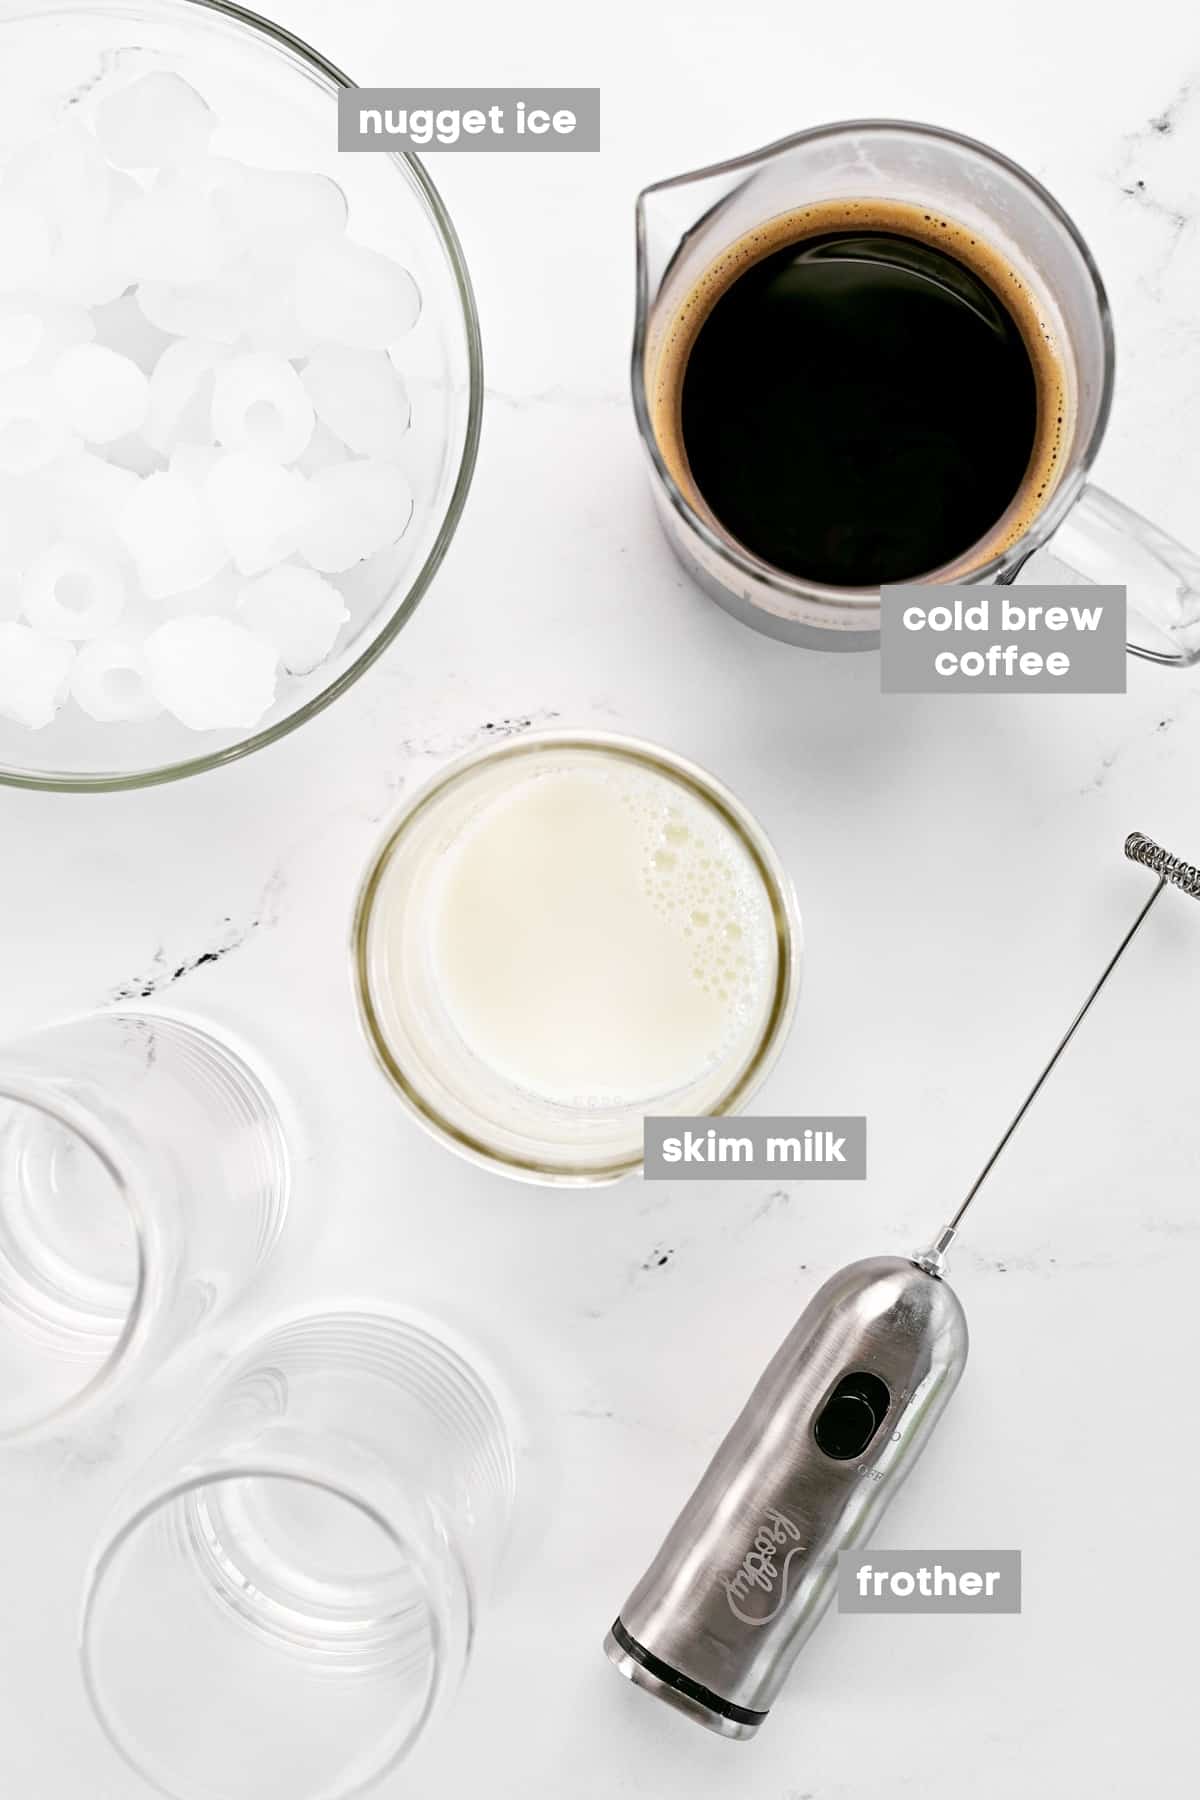 Ingredients in bowls, a frother, and two glasses.